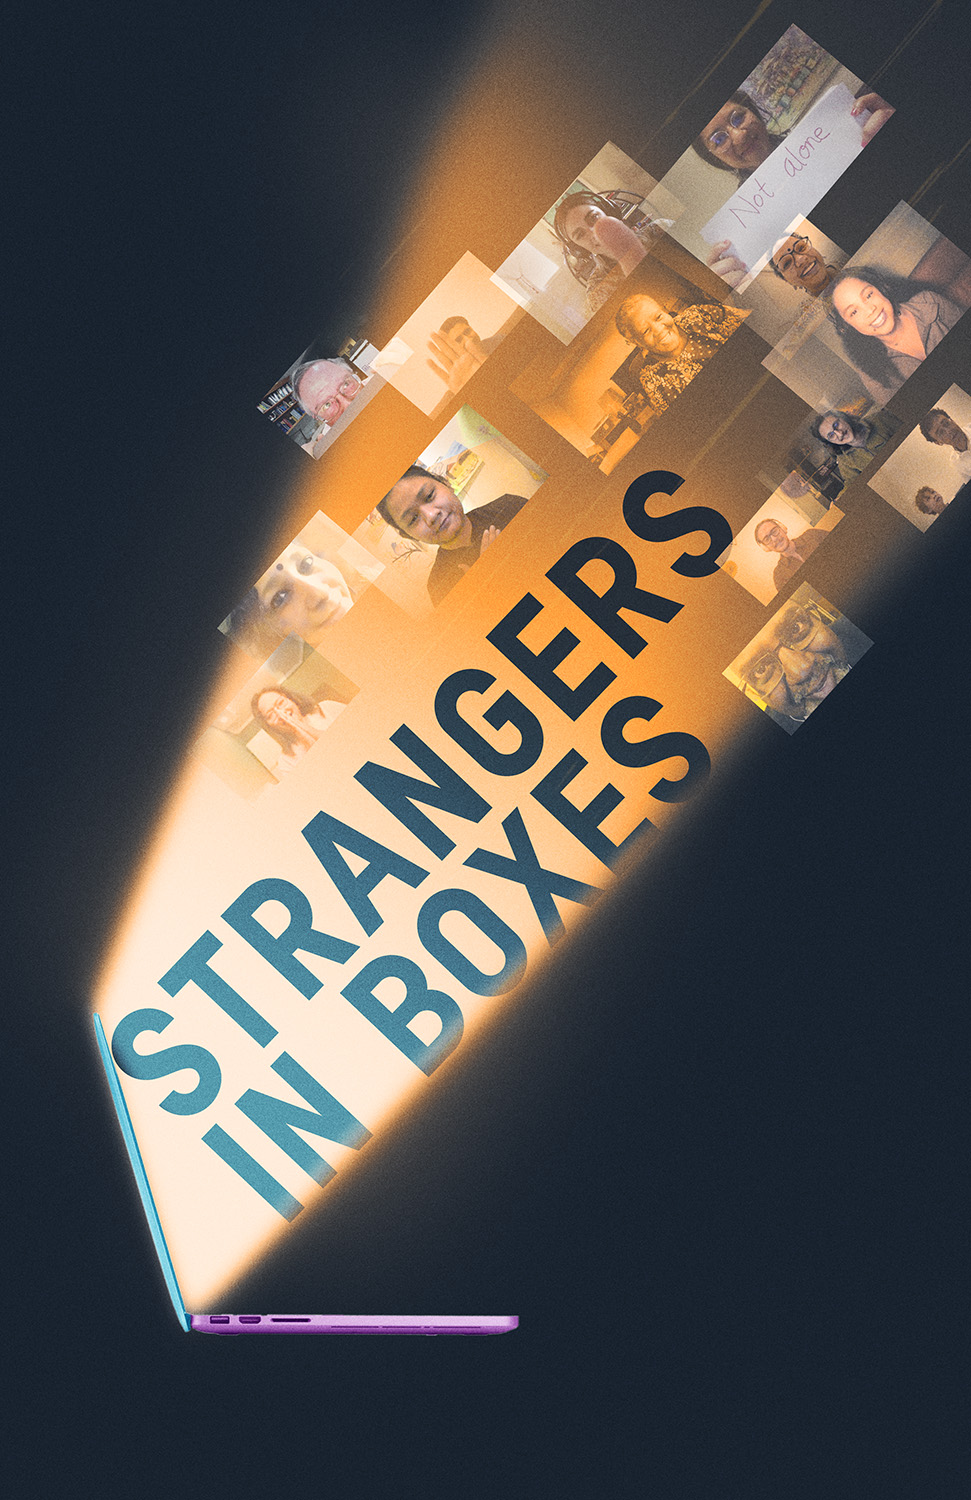 Strangers in Boxes Image